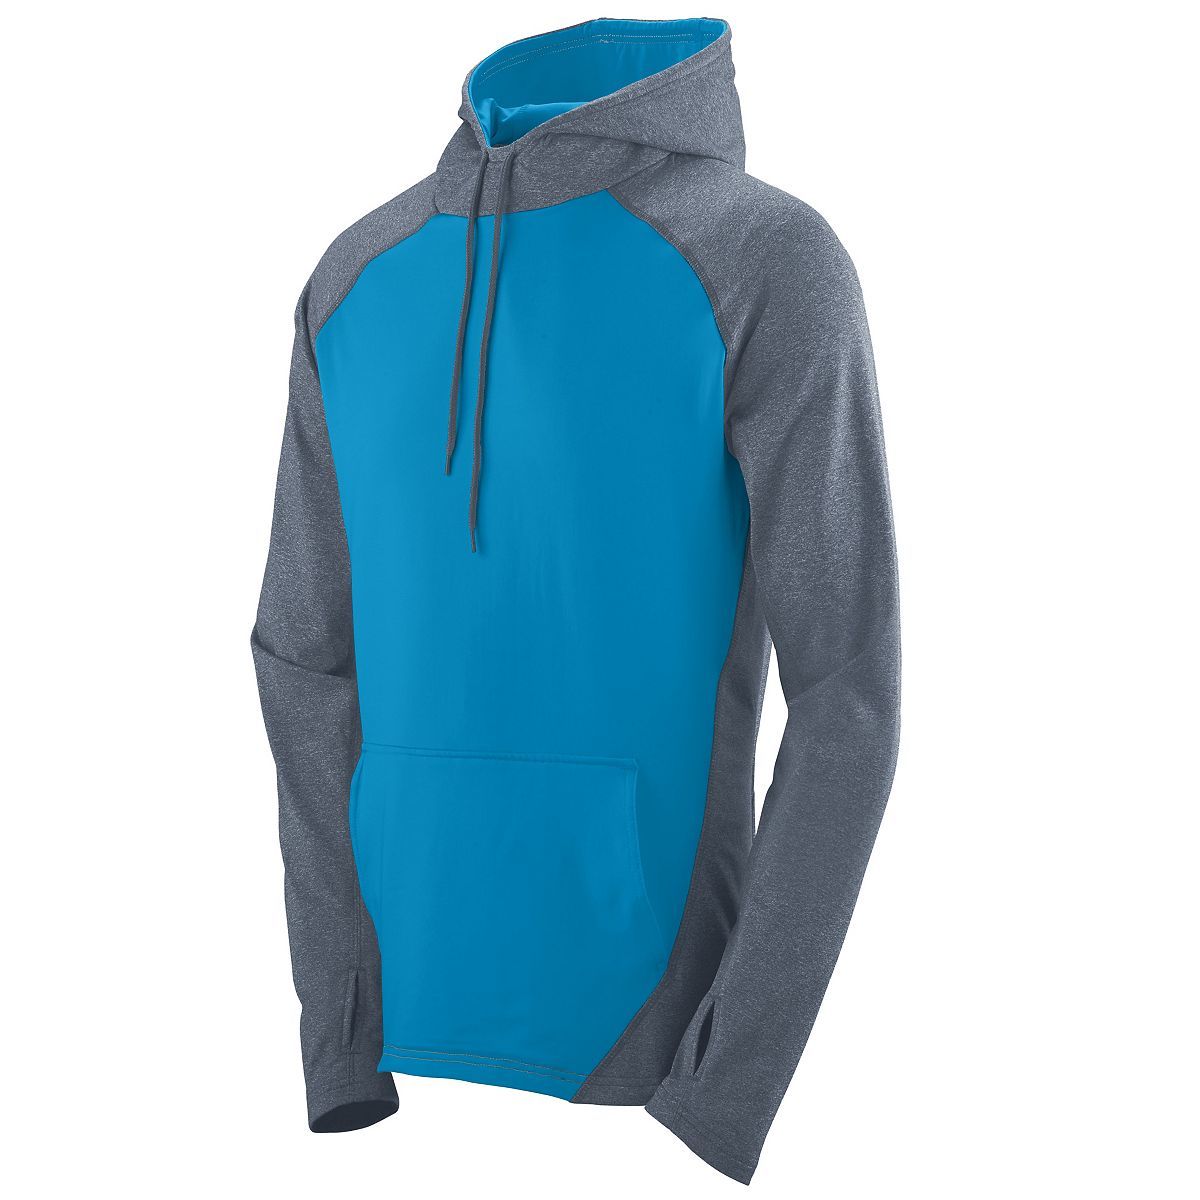 Augusta Sportswear Zeal Hoodie in Graphite Heather/Power Blue  -Part of the Adult, Adult-Hoodie, Hoodies, Augusta-Products product lines at KanaleyCreations.com